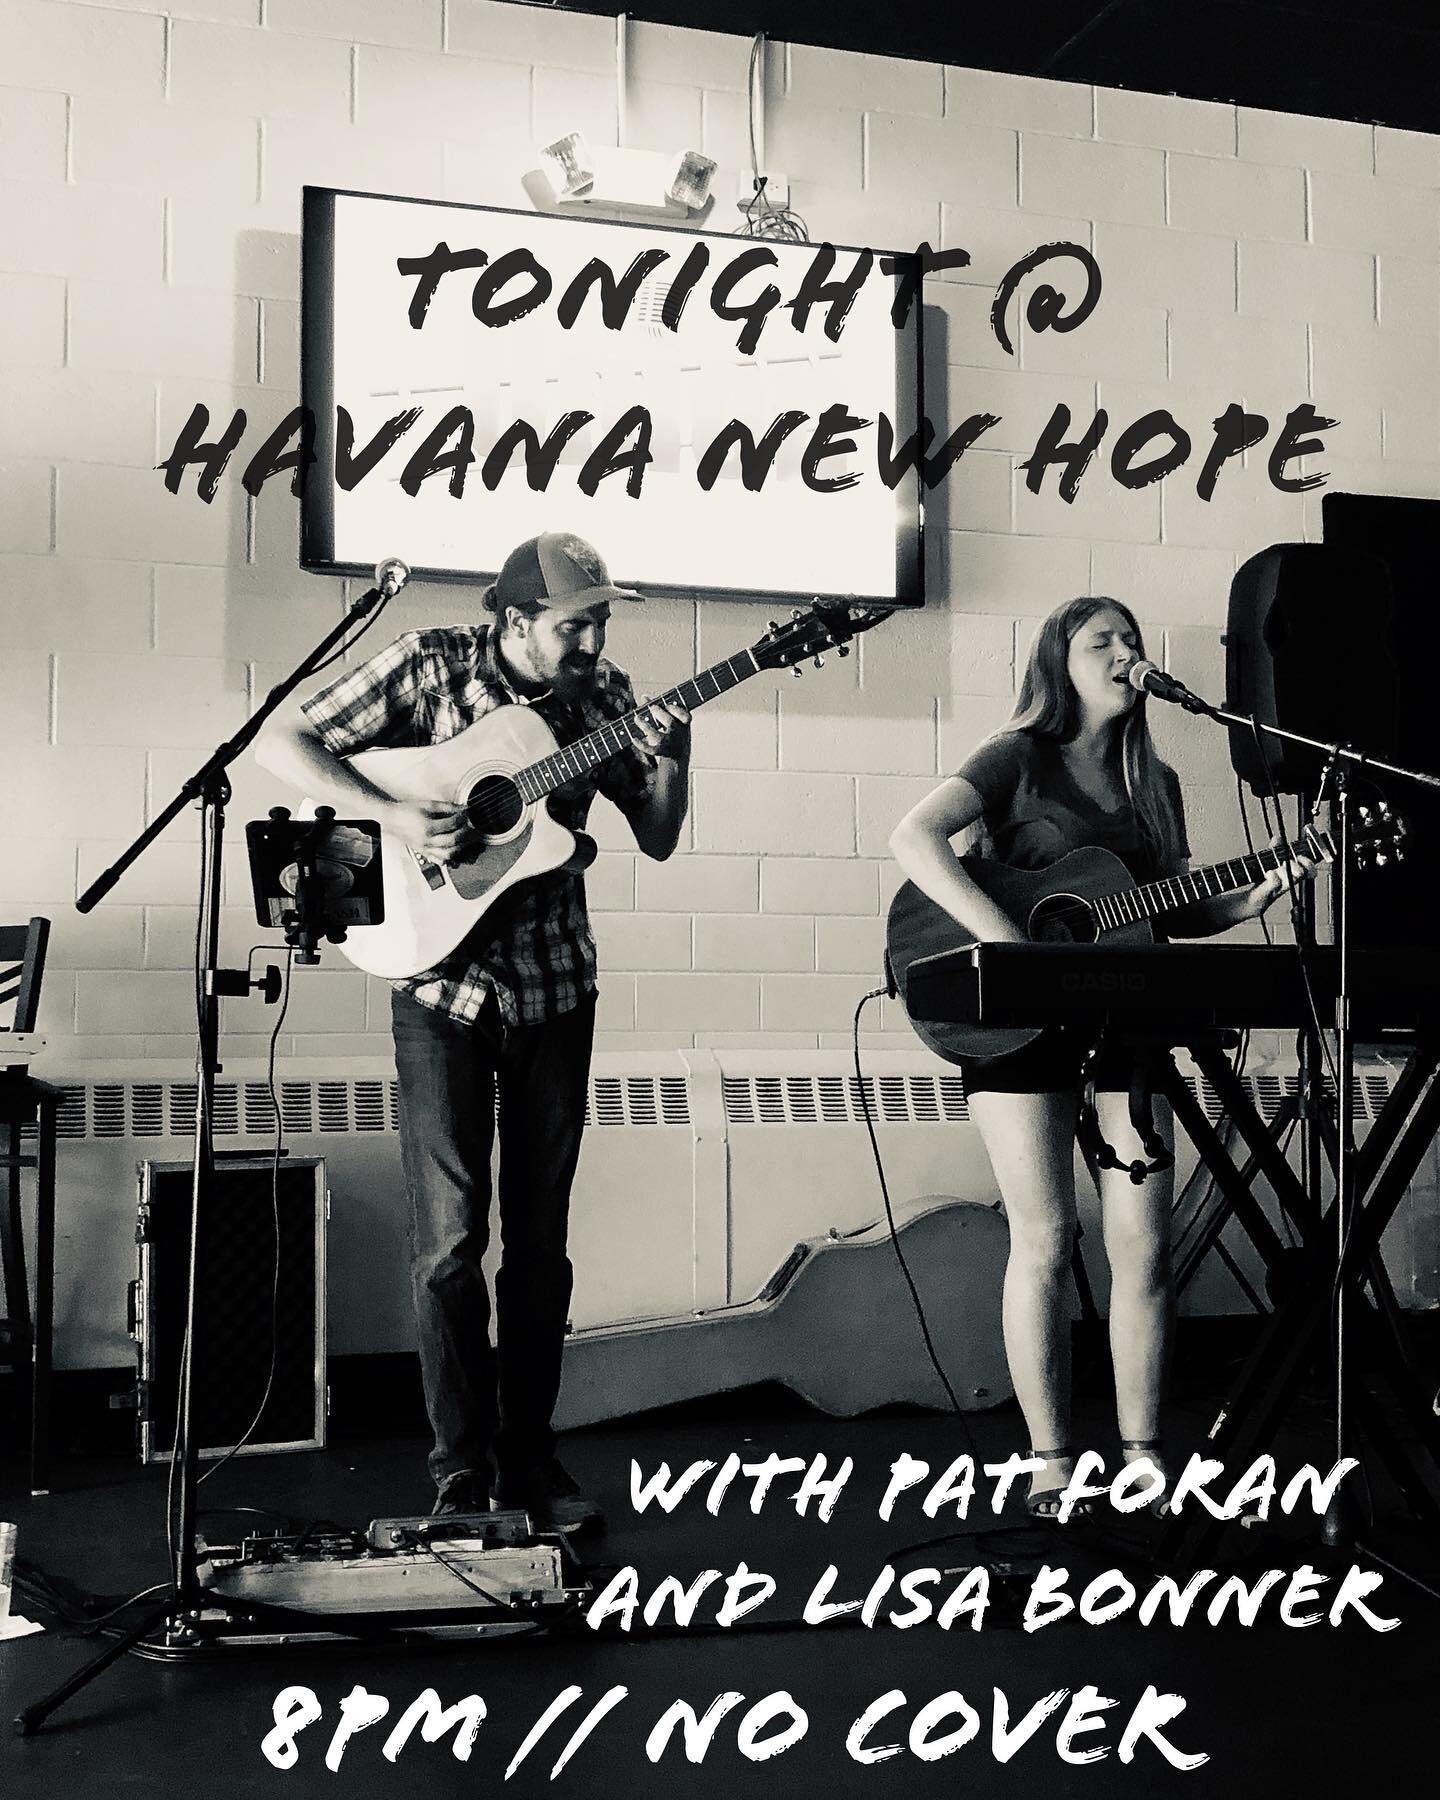 Tonight we&rsquo;re back at Havana New Hope with Pat Foran and Lisa Bonner. 8pm and never a cover. Catch you there!